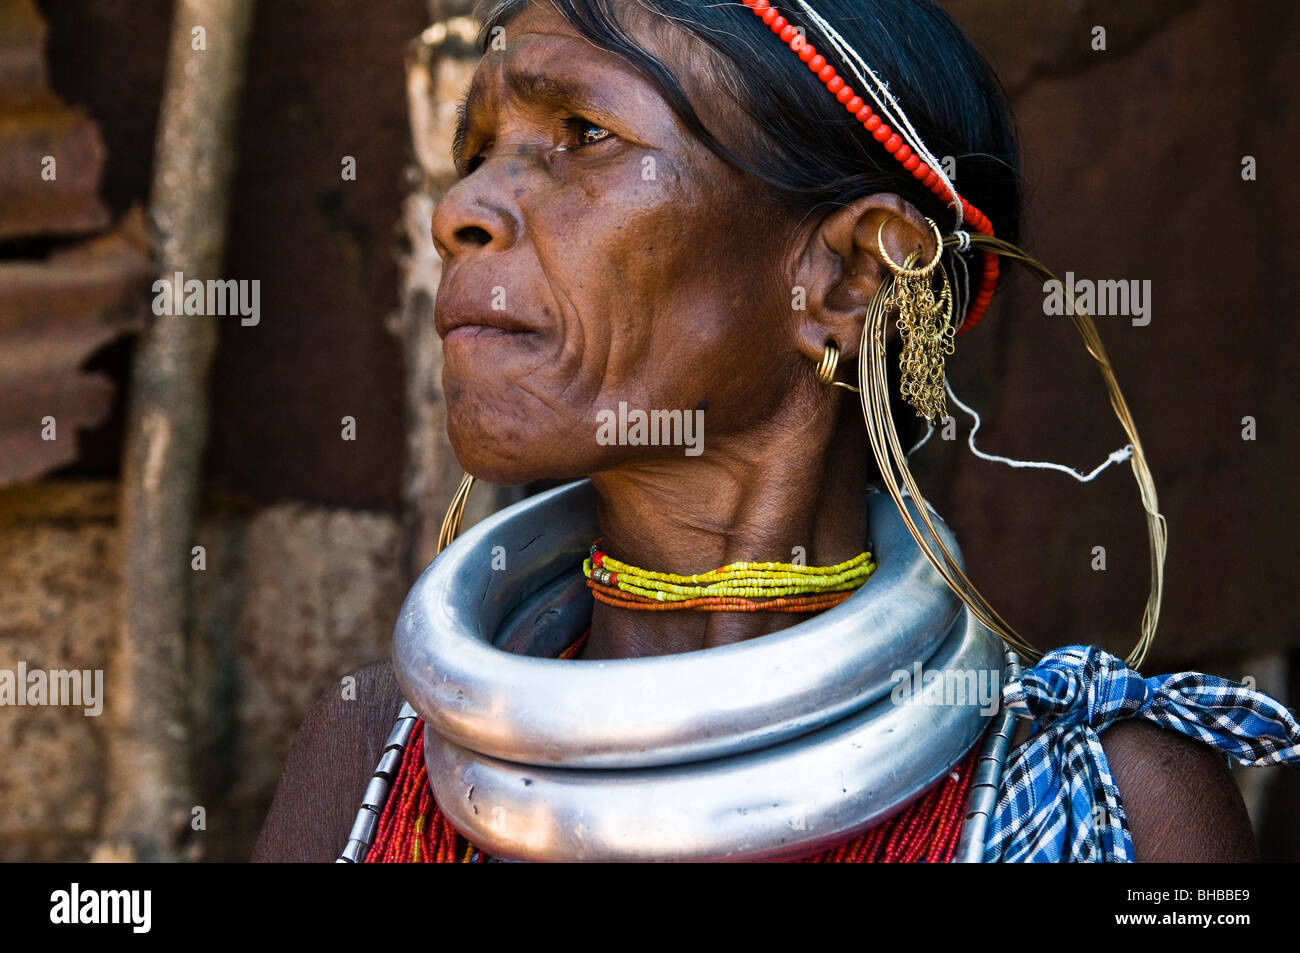 African woman editorial stock photo. Image of women, tradition - 5439978